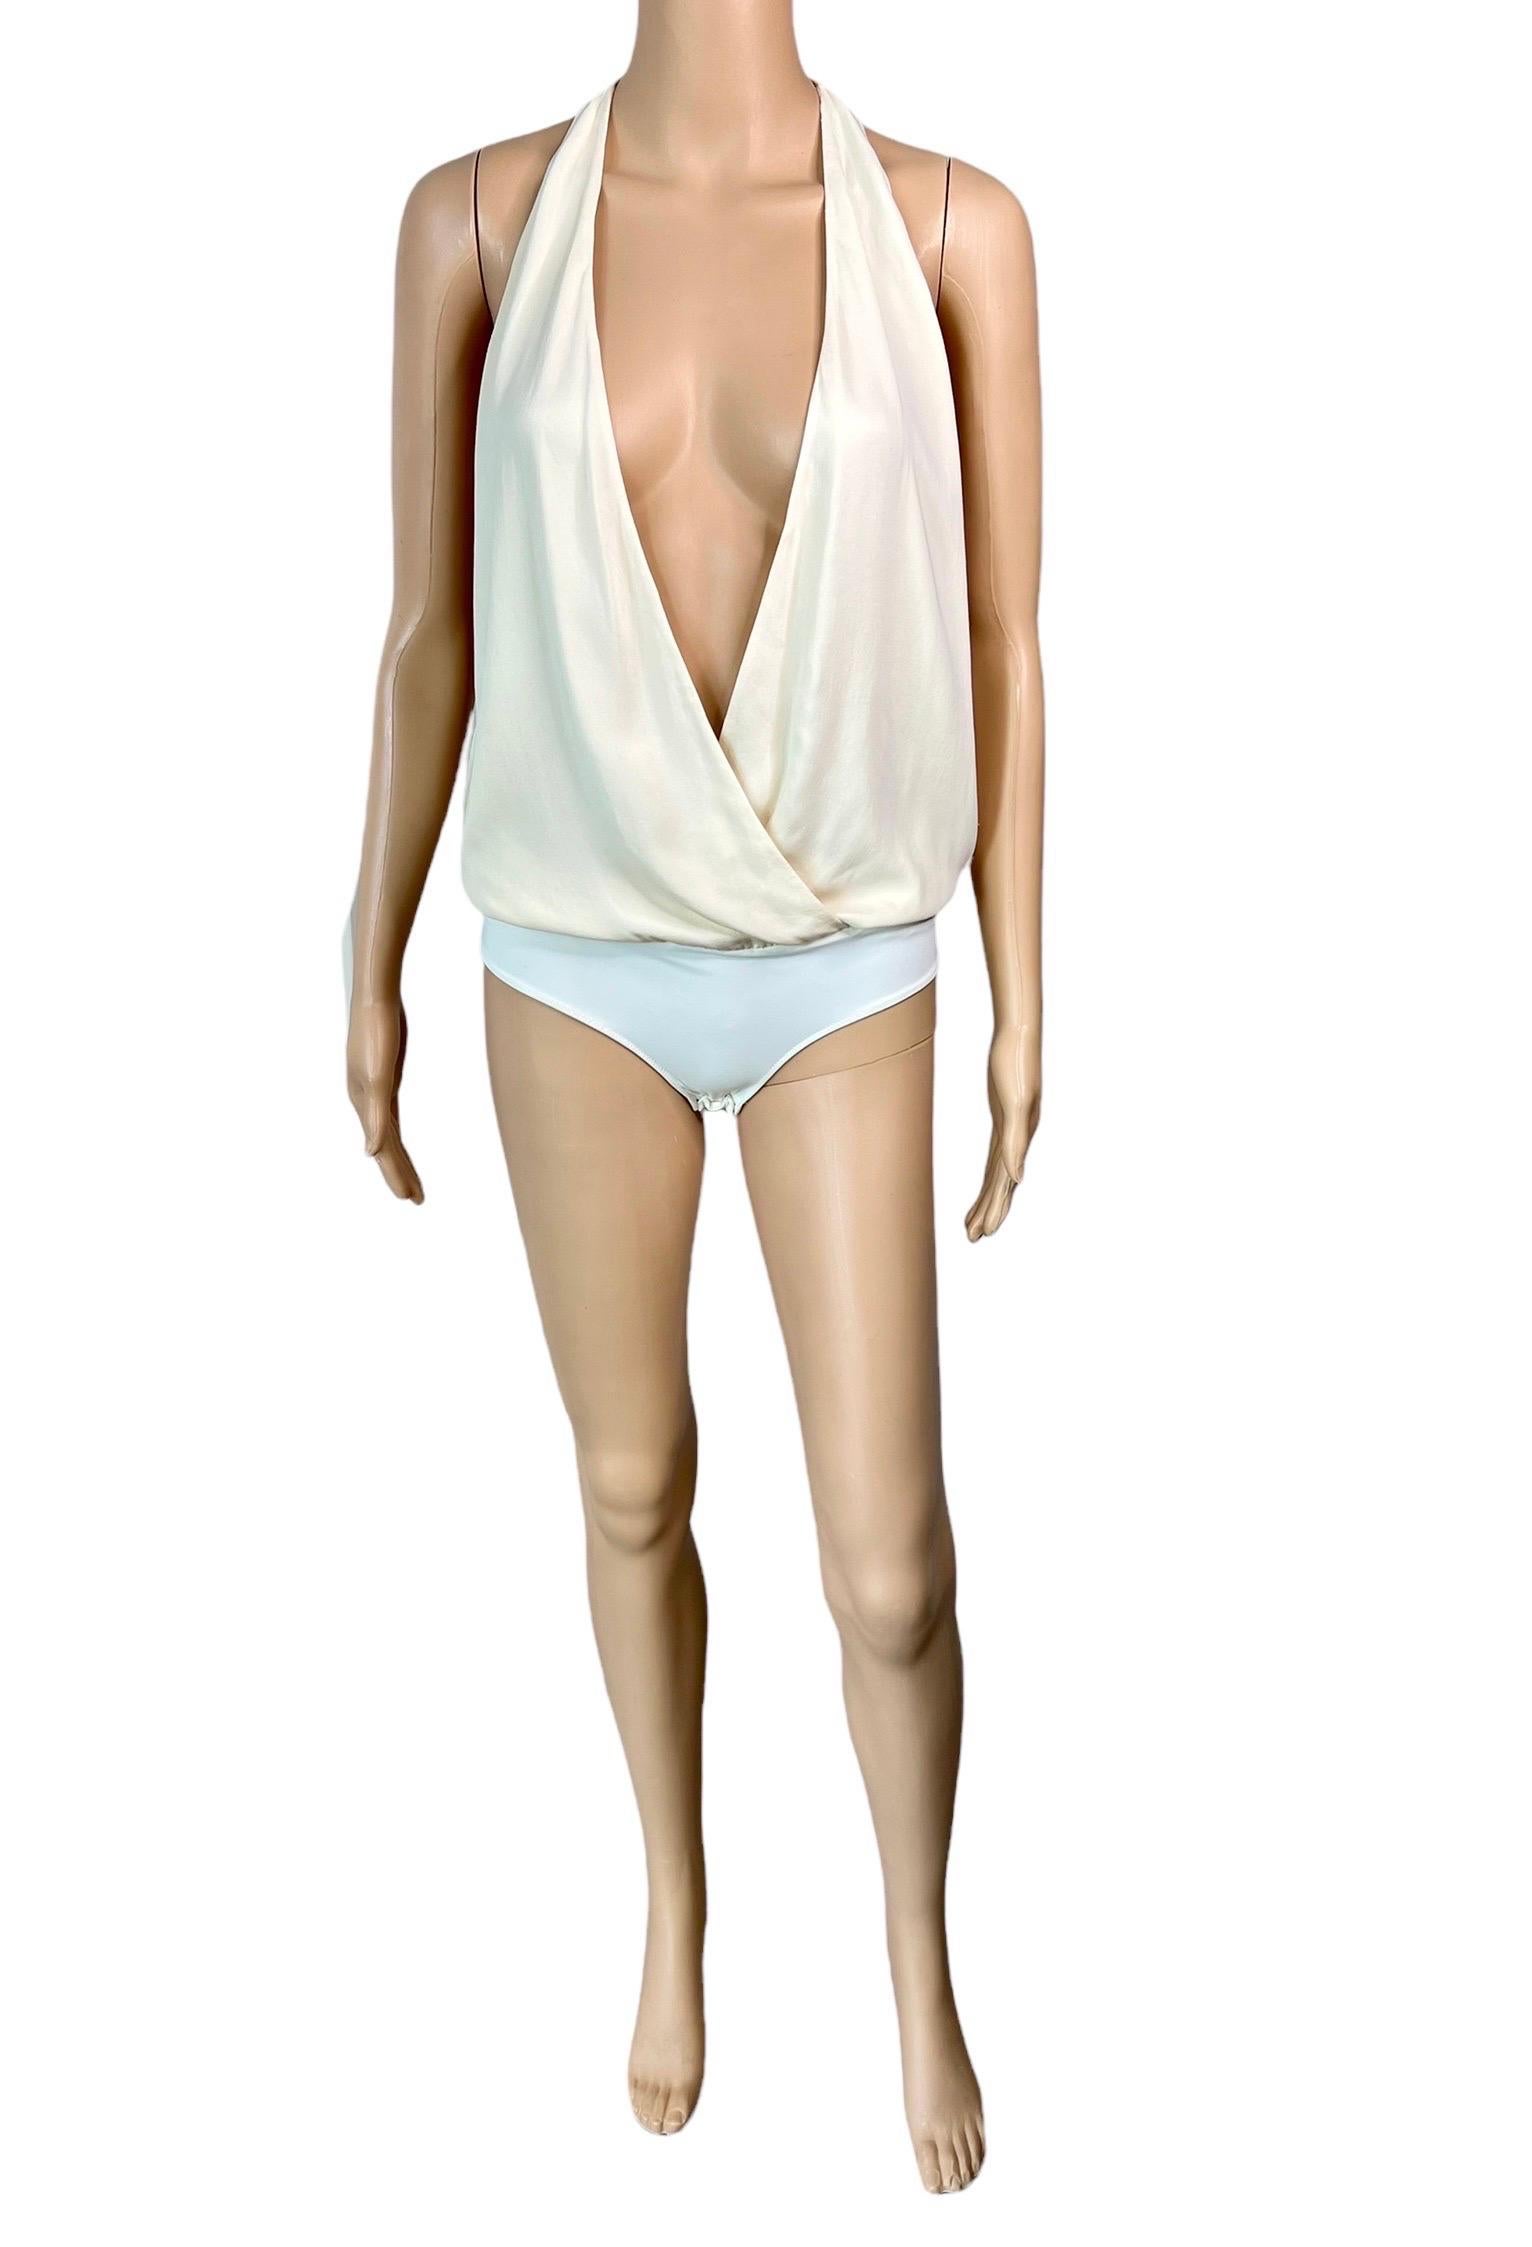 Gucci S/S 2012 Runway Sheer Plunging Neckline Cutout Ivory Bodysuit Top For Sale 3